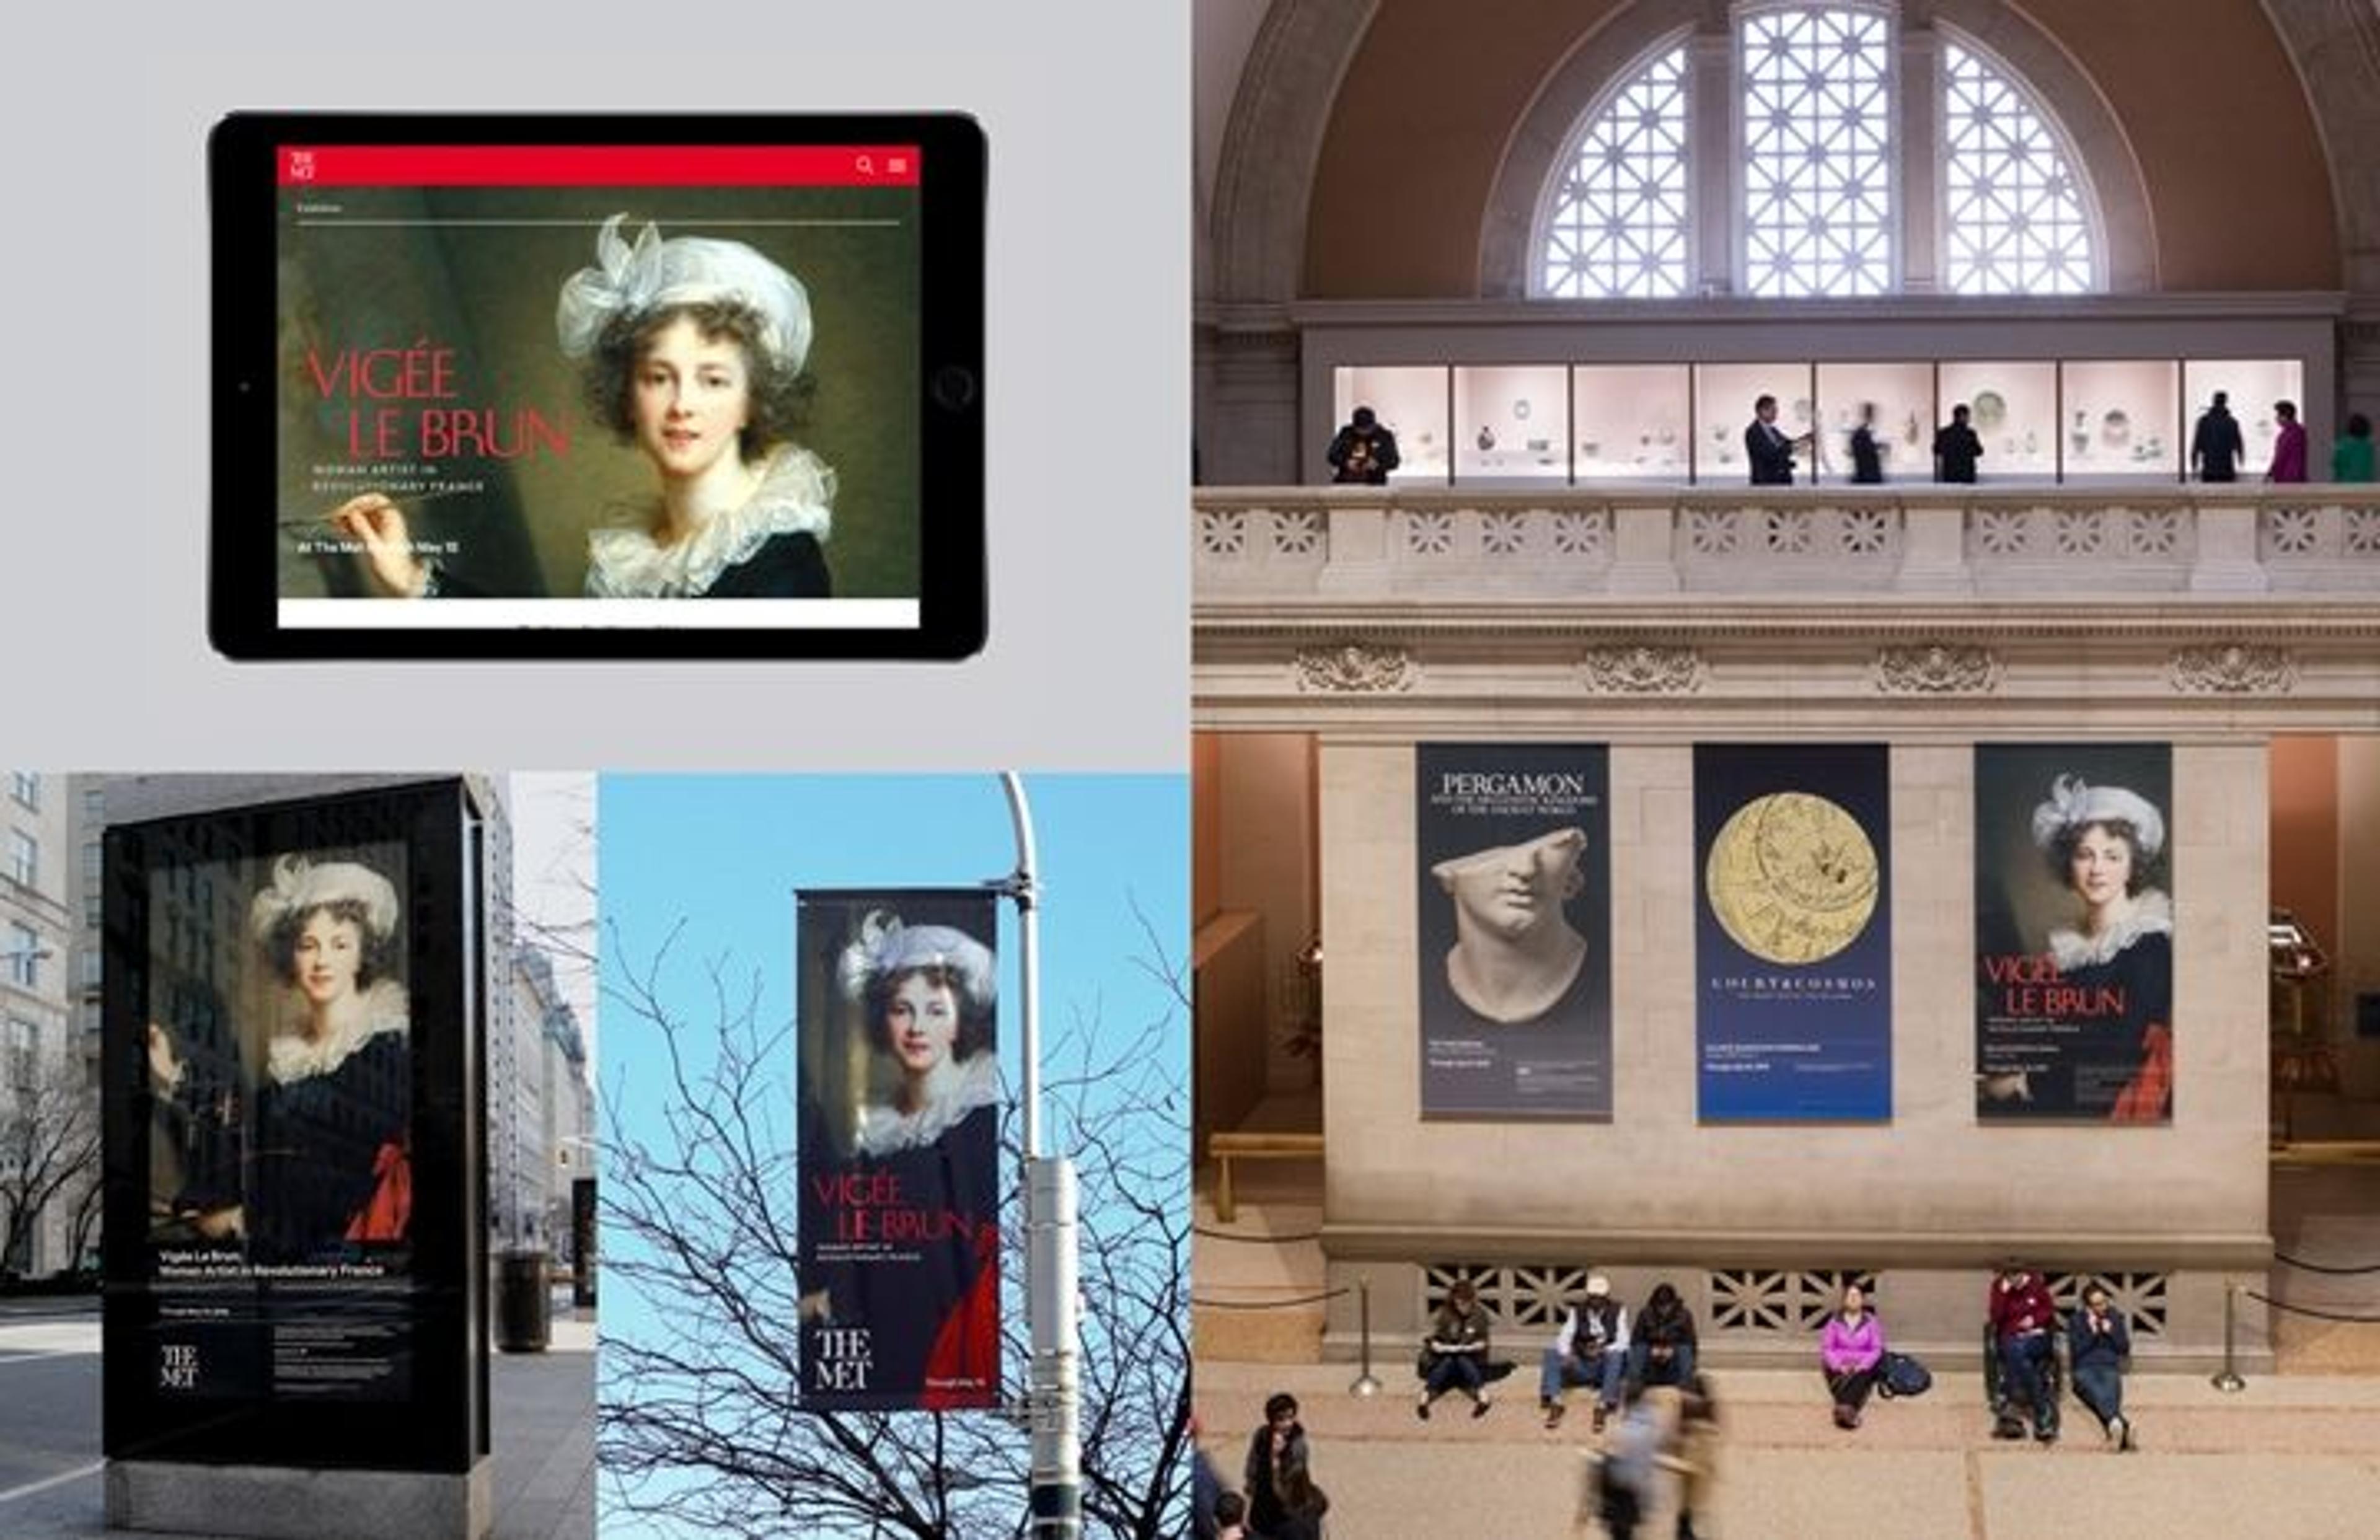 Exhibition signage across various platforms: web pages, outdoor stanchions, and banners in The Met's Great Hall